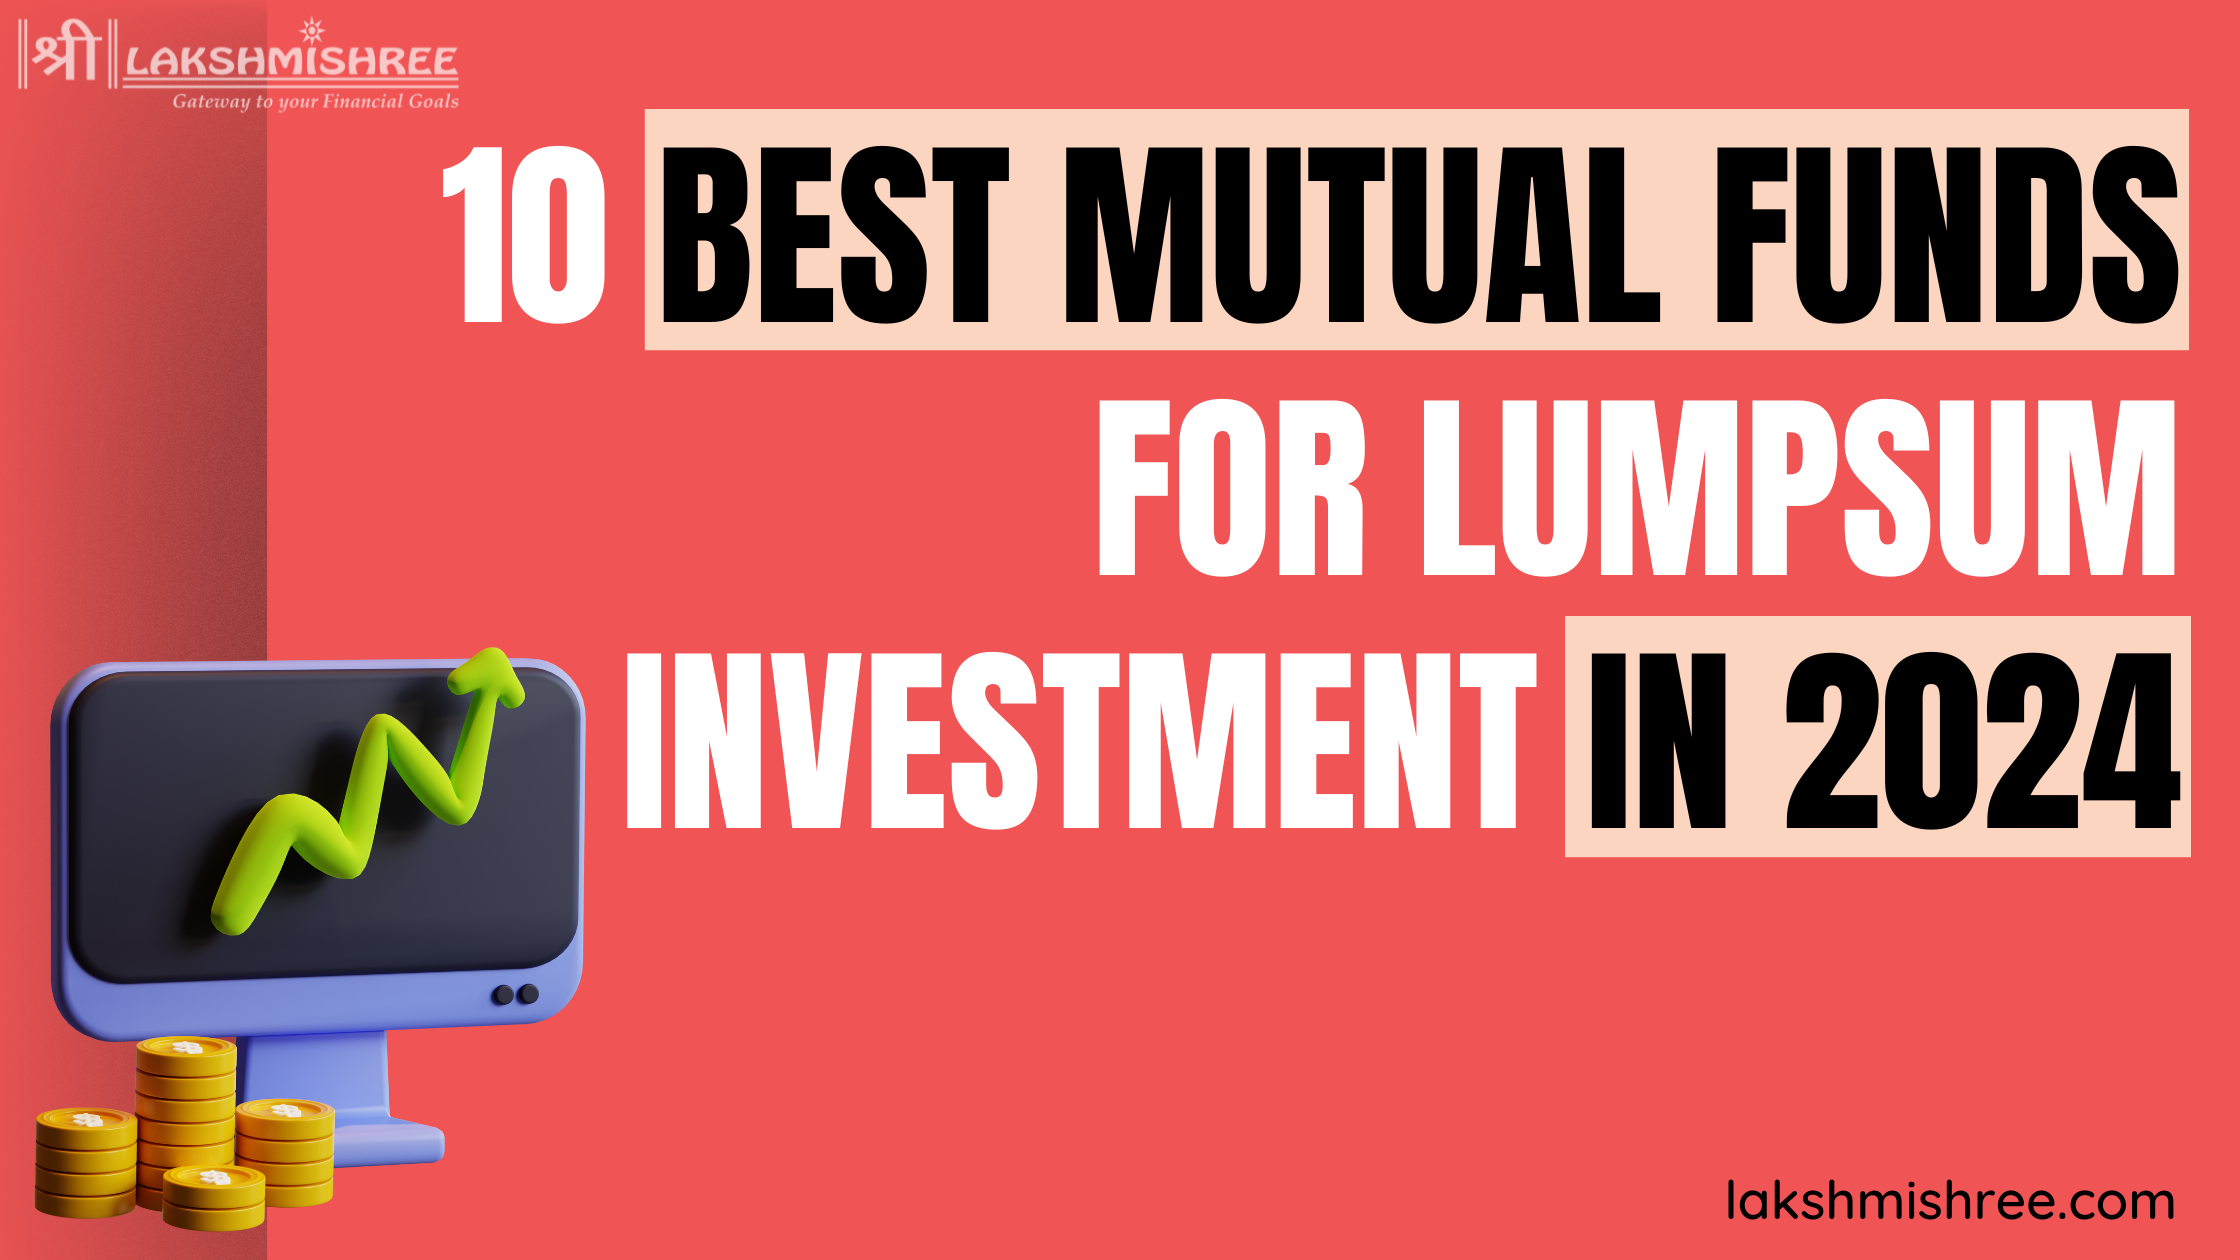 10 Best Mutual Funds for Lumpsum Investment in 2024